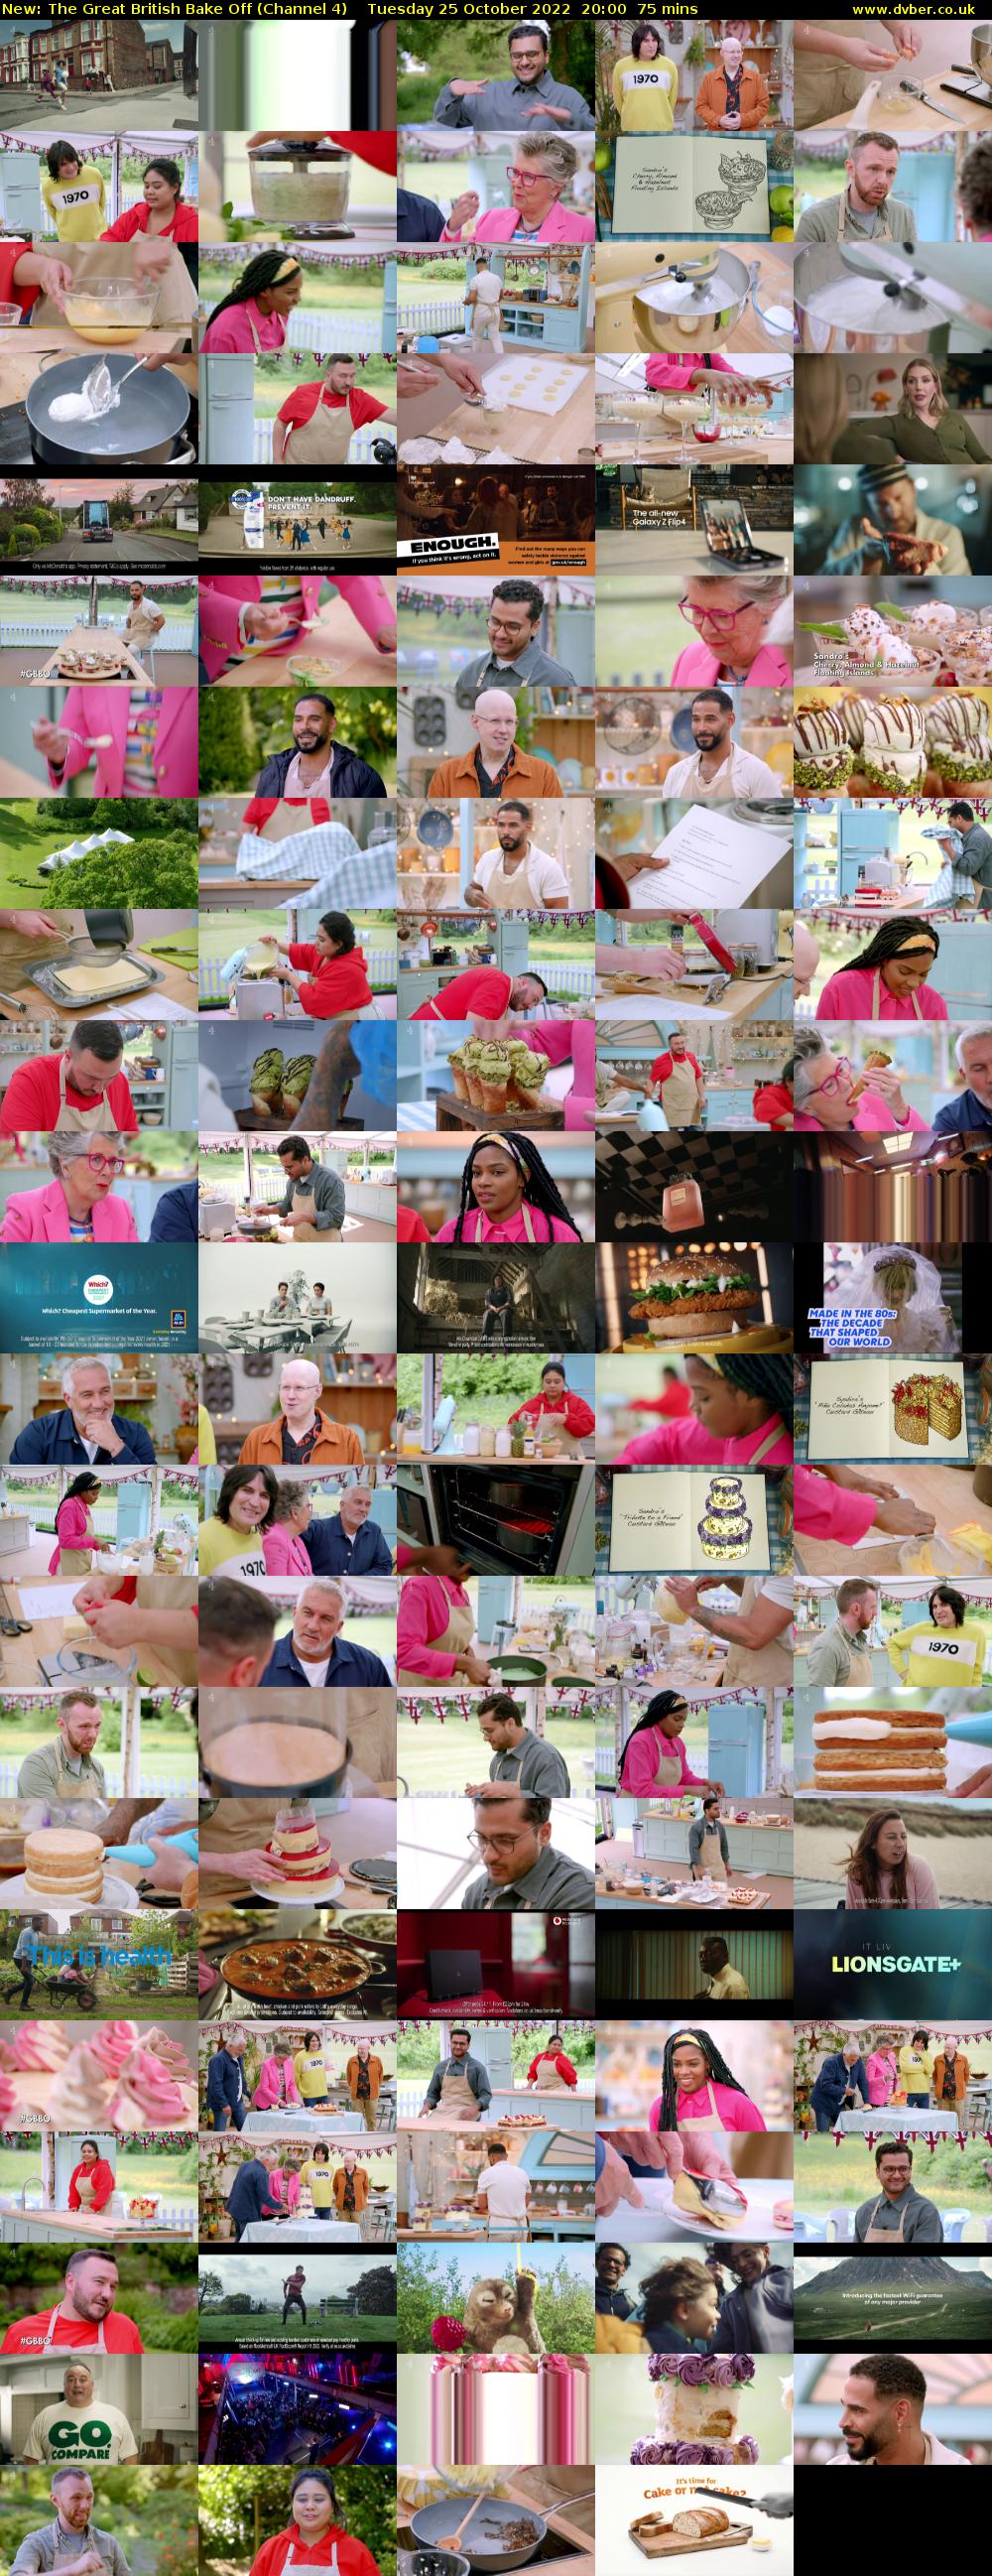 The Great British Bake Off (Channel 4) Tuesday 25 October 2022 20:00 - 21:15